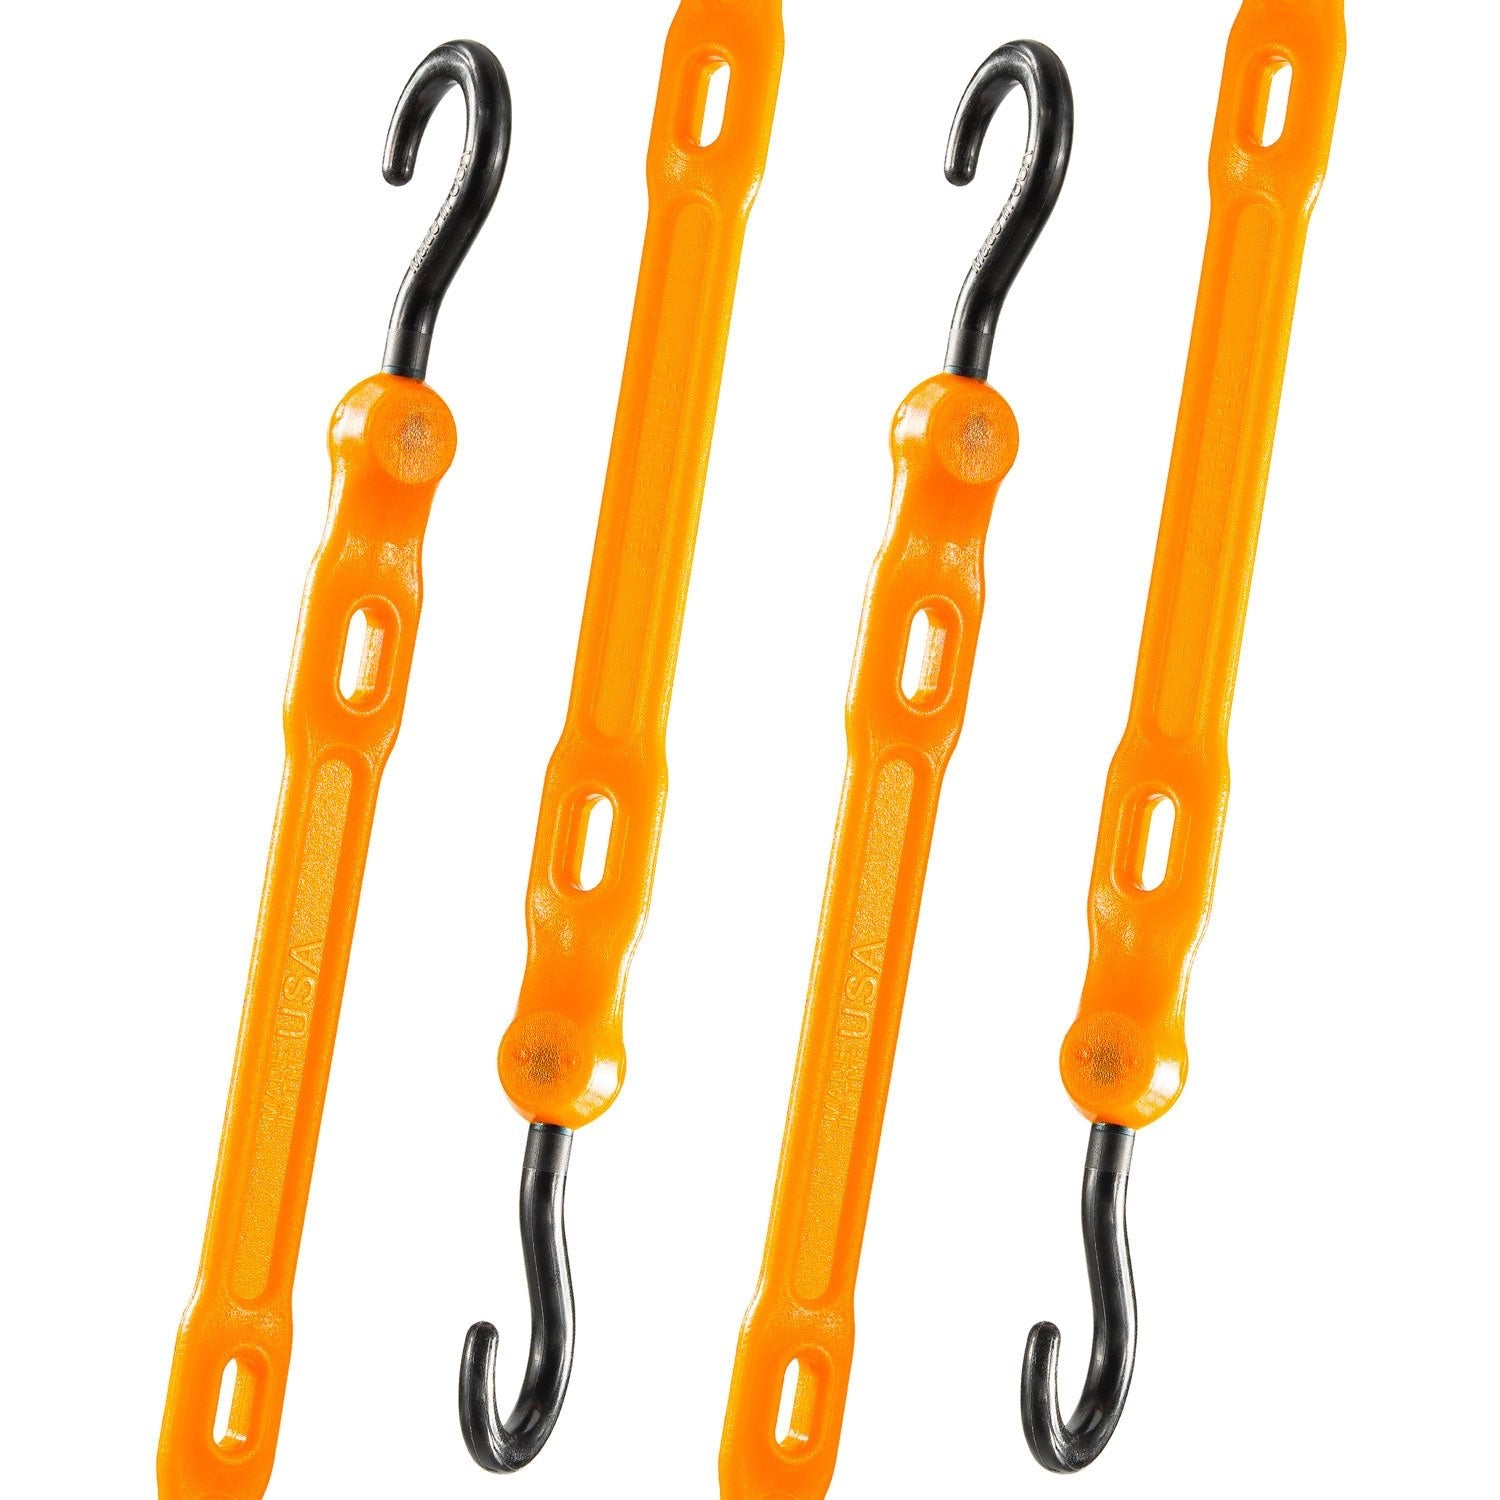 36" Adjust-A-Strap Adjustable Bungee Strap 4 Pack - The Perfect Bungee & ShockStrap Tie Downs